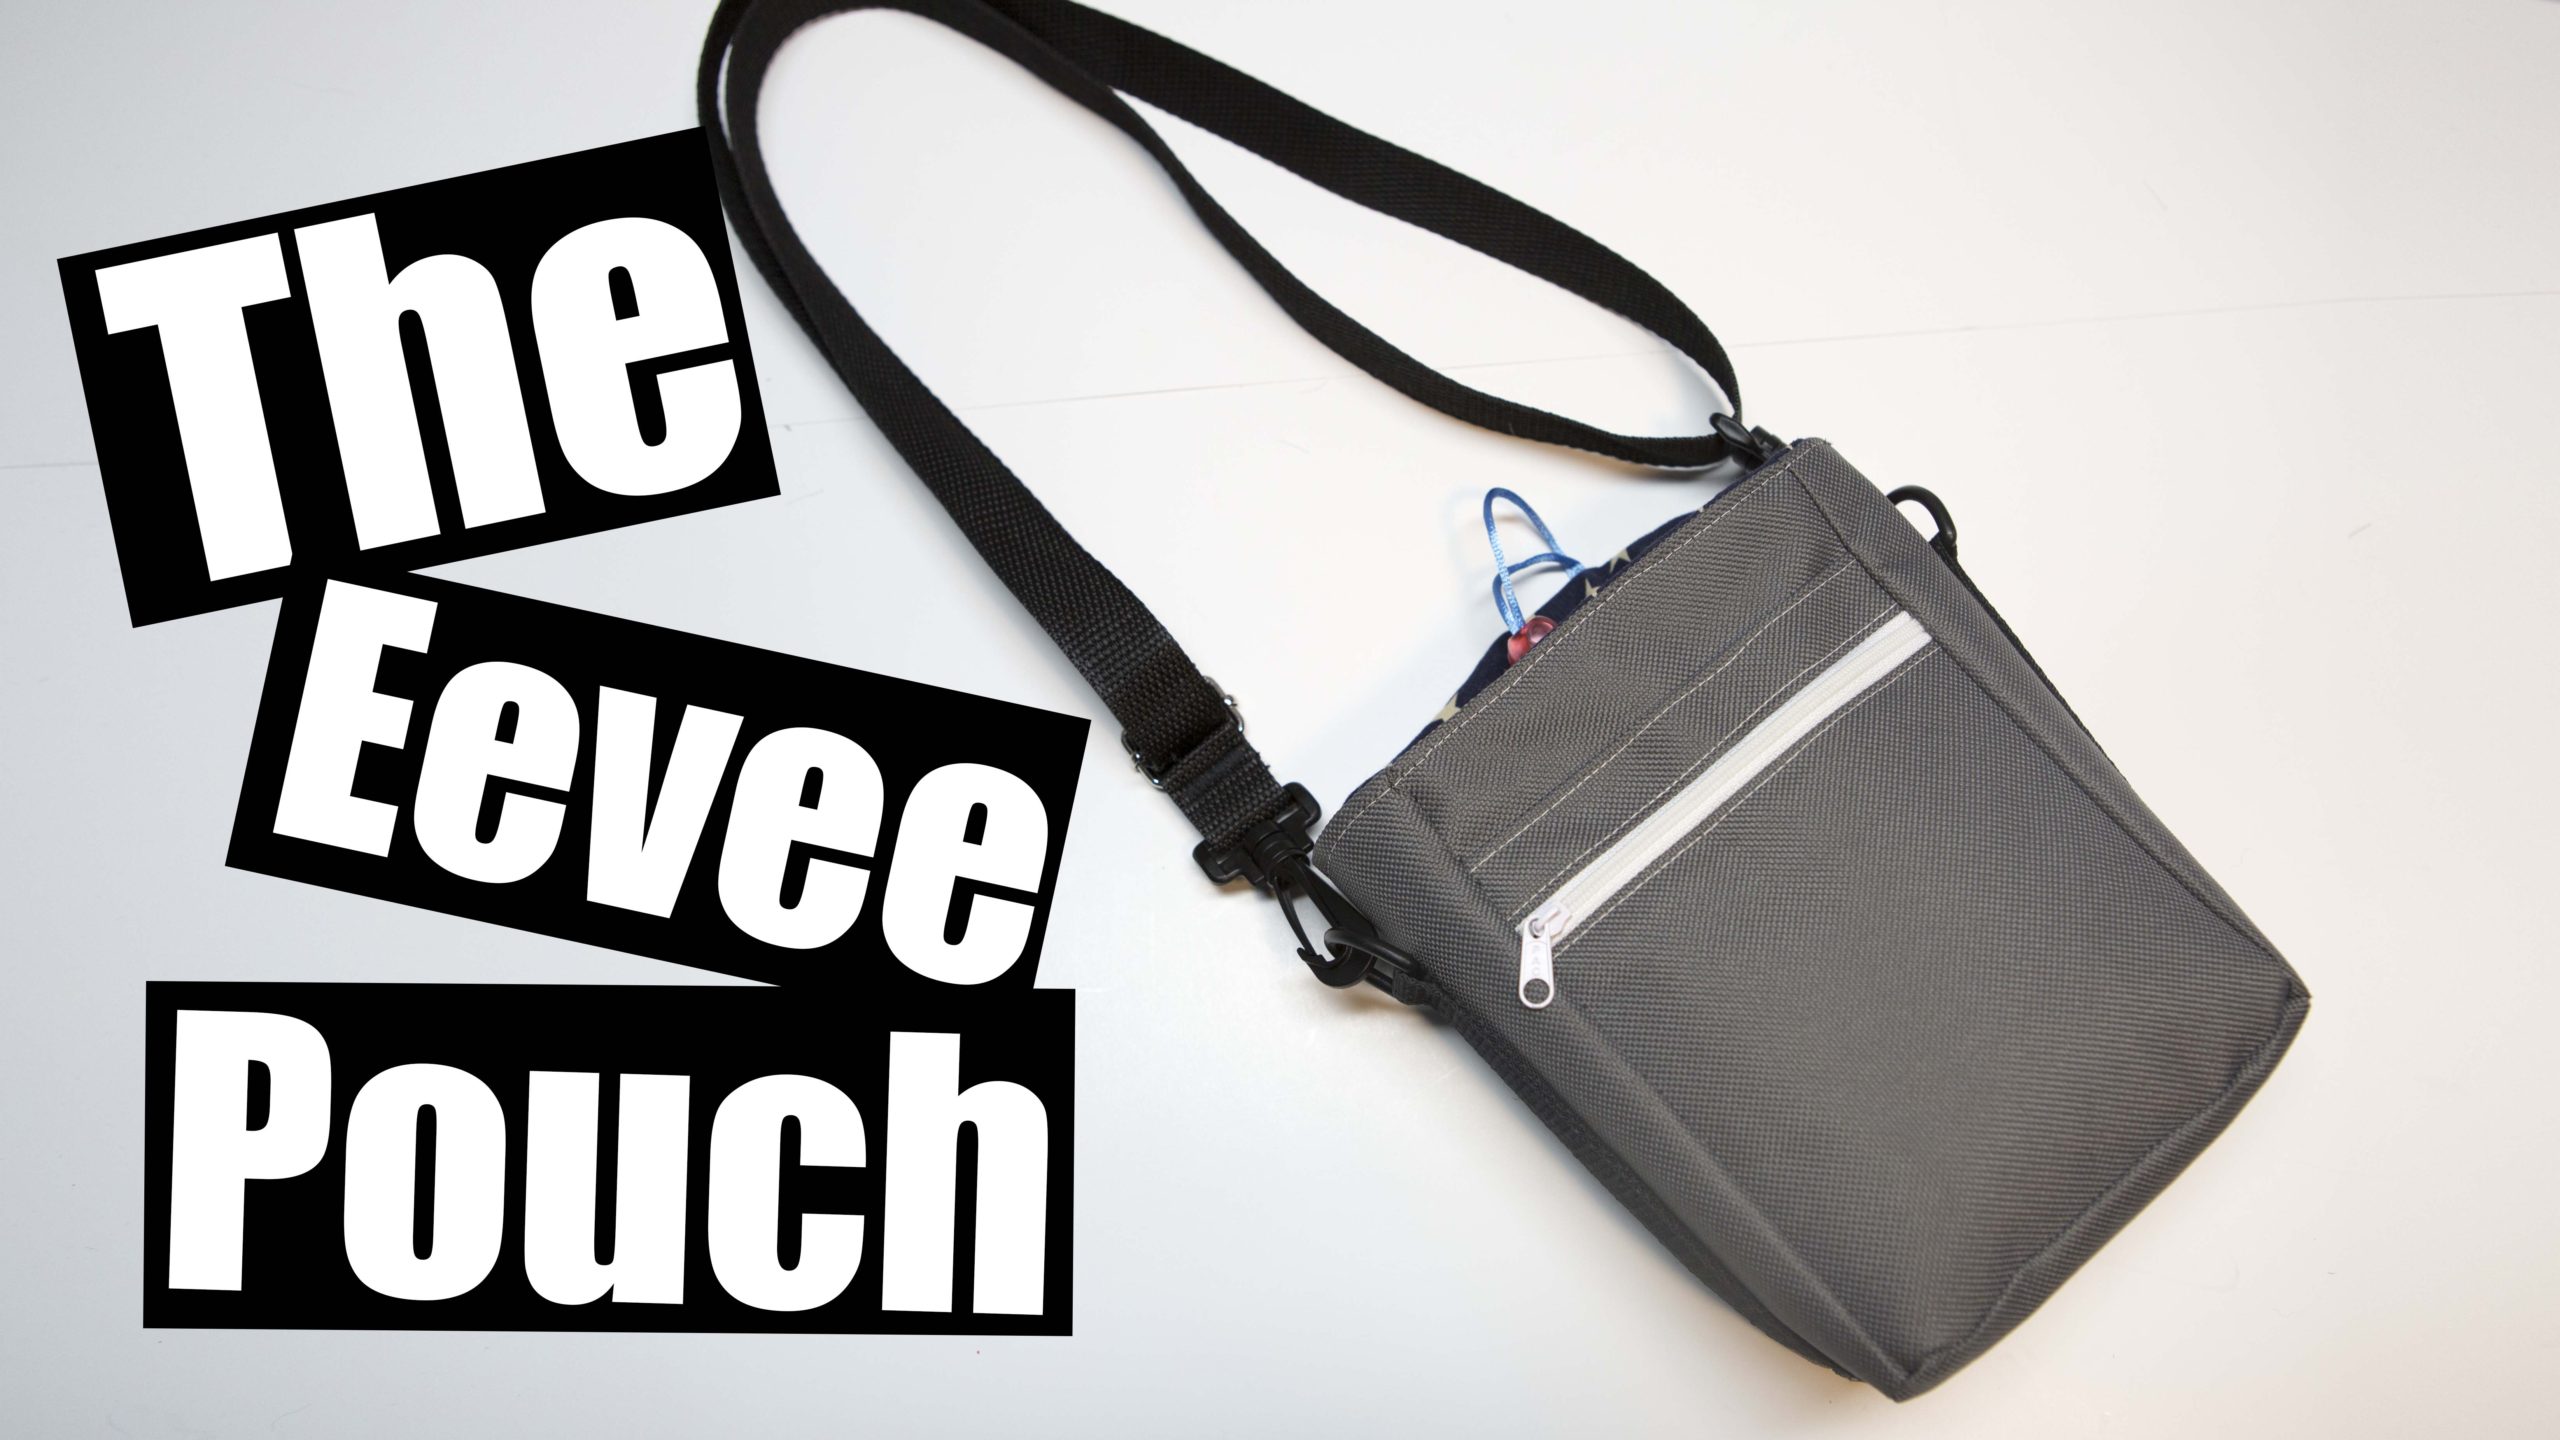 The Eevee pouch